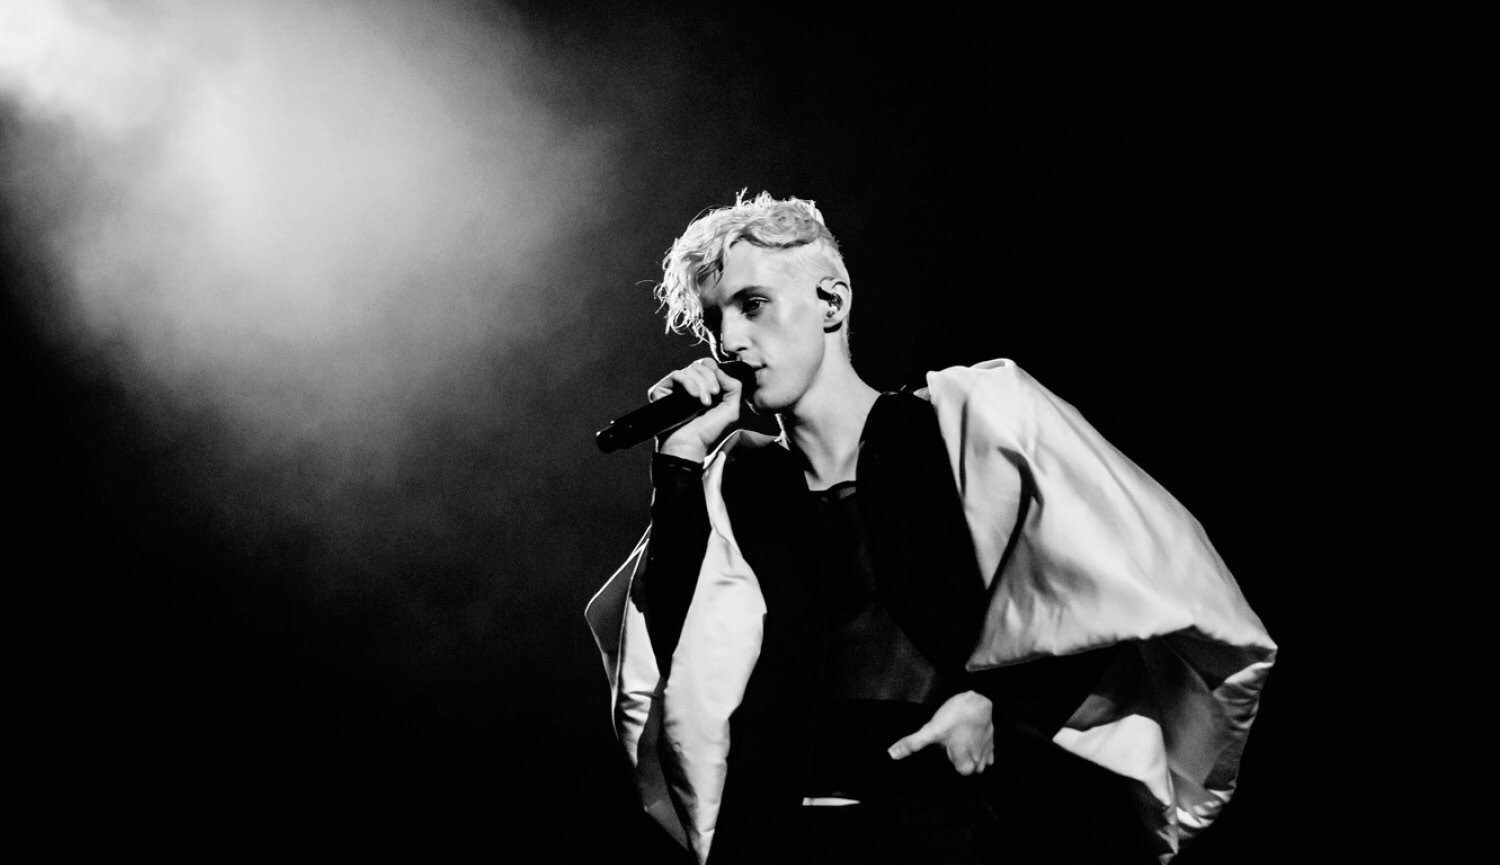 Troye Sivan for The Bloom Tour, styled by Dogukan Nesanir